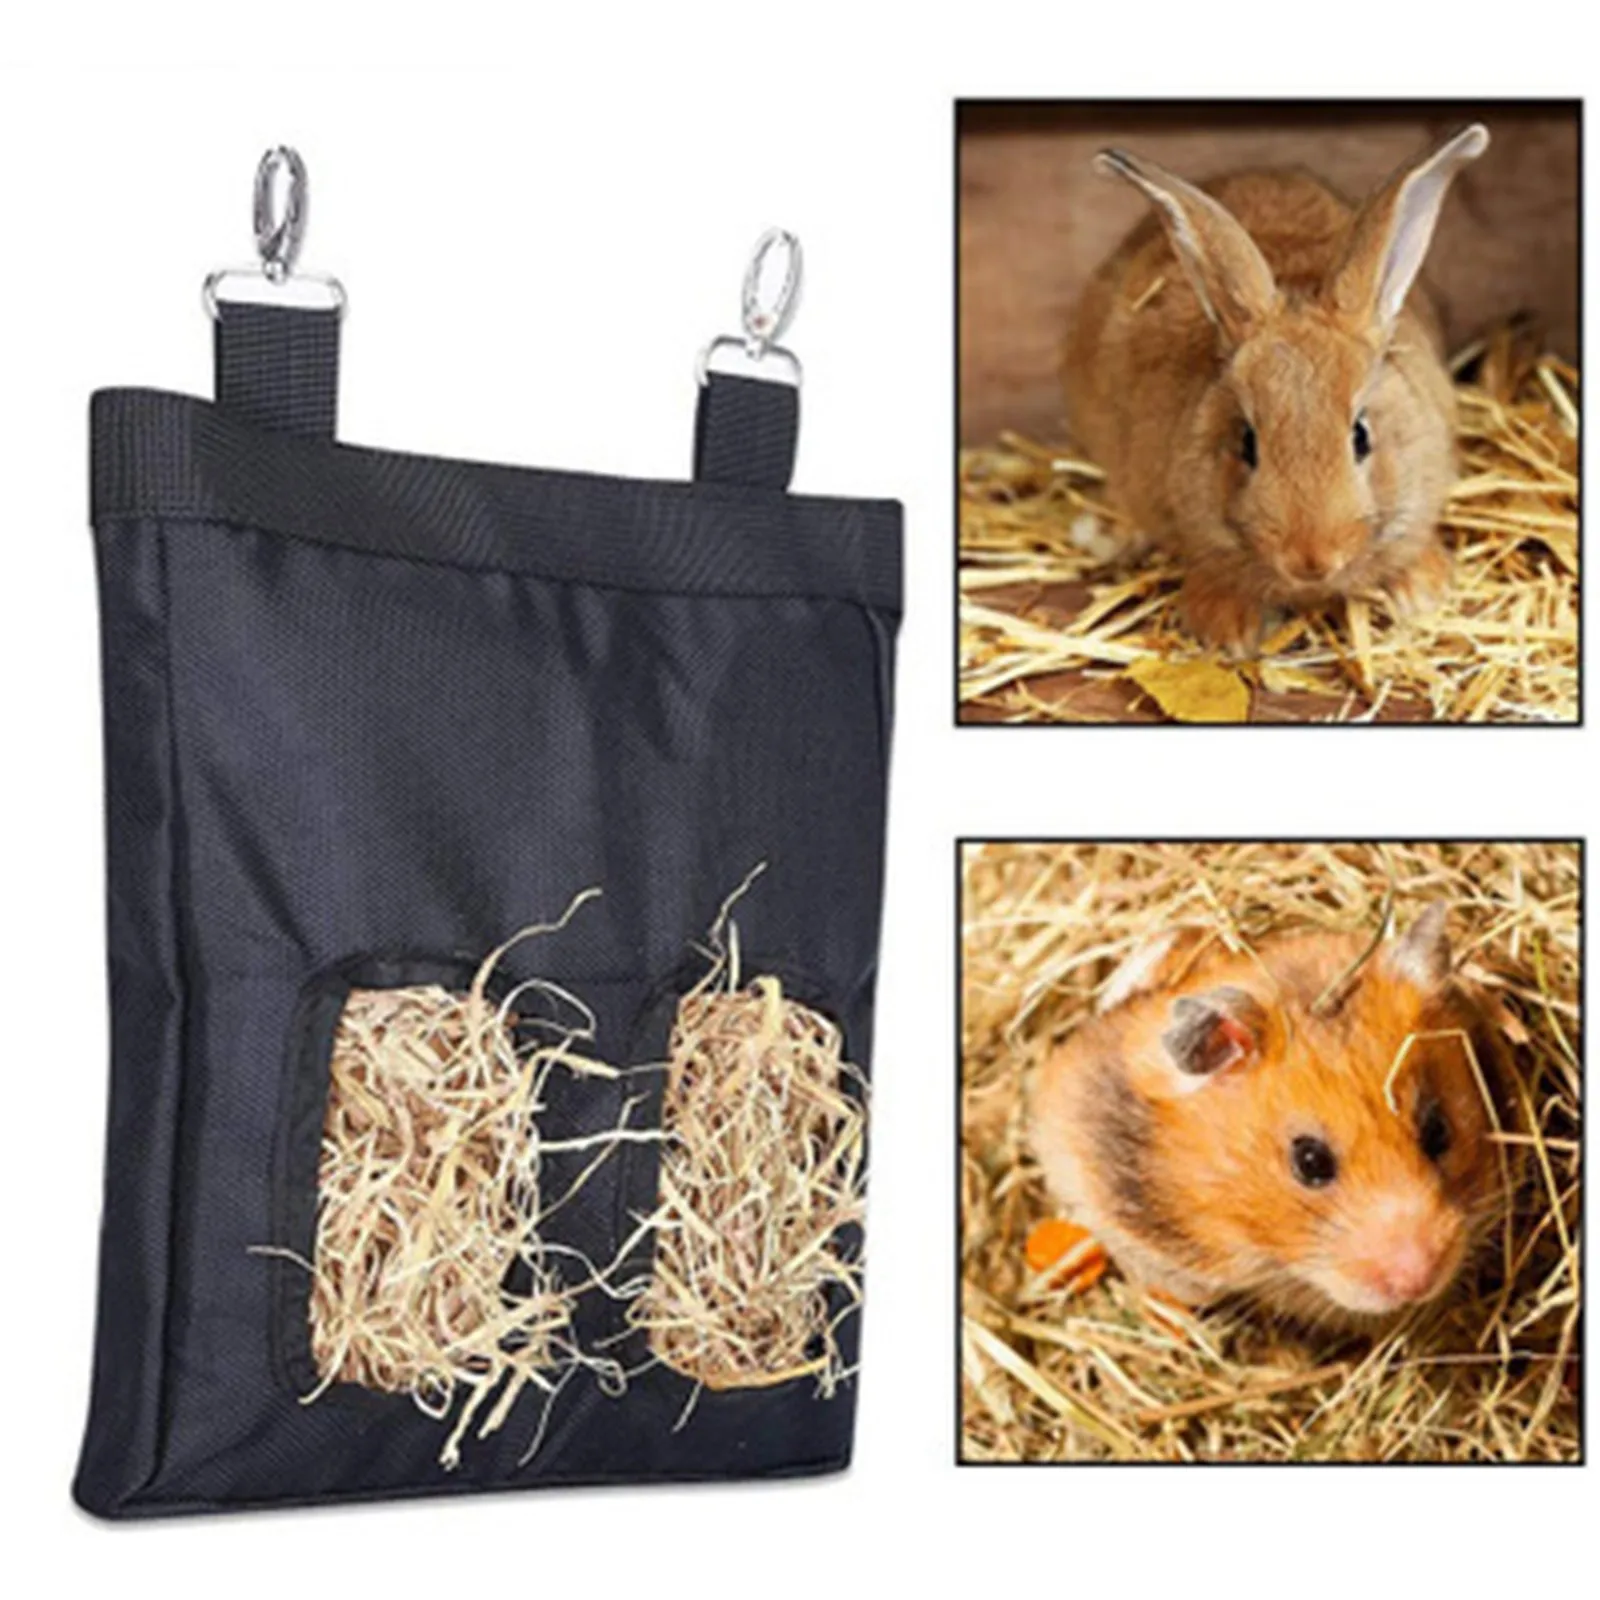 

Hanging H^ay Bag Feeder Bag Feed Device Device Hanging Bag Feeder Bag Feed Device Device Supply Rabbit Guinea Pig Small Animal P